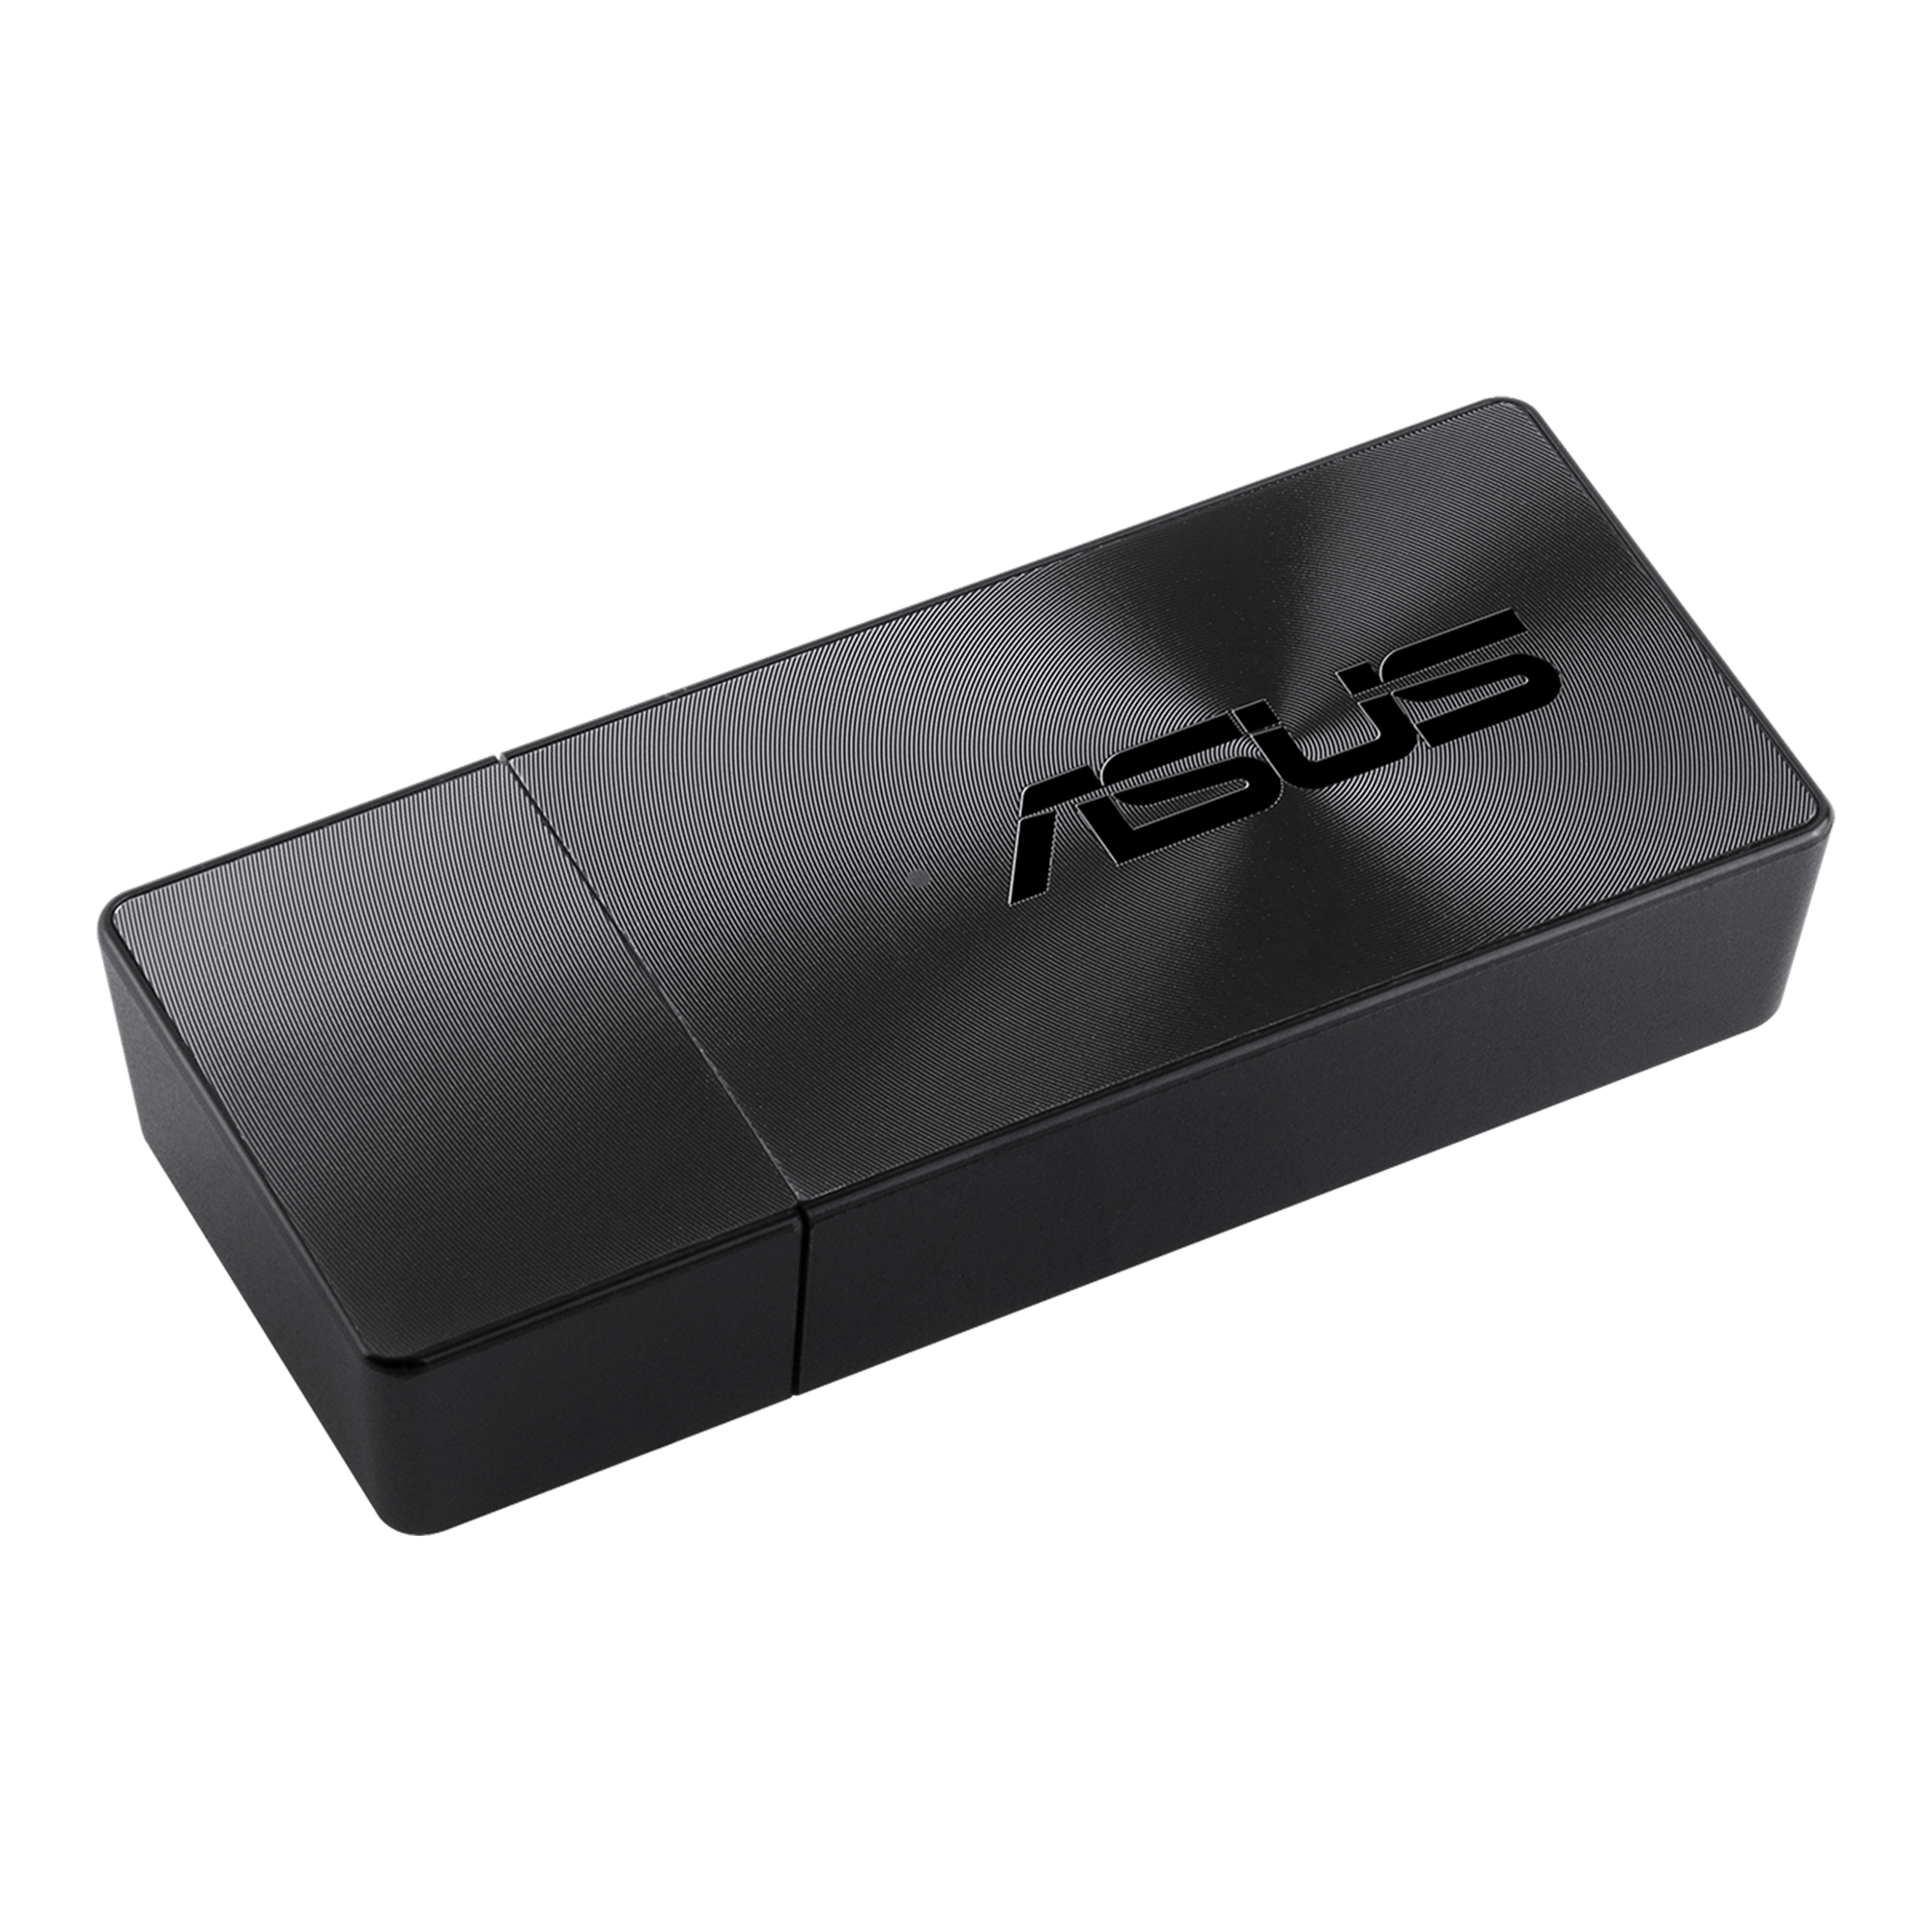 ASUS USB-AC55 B1 Linux Mint 20 Driver Installation - Featured